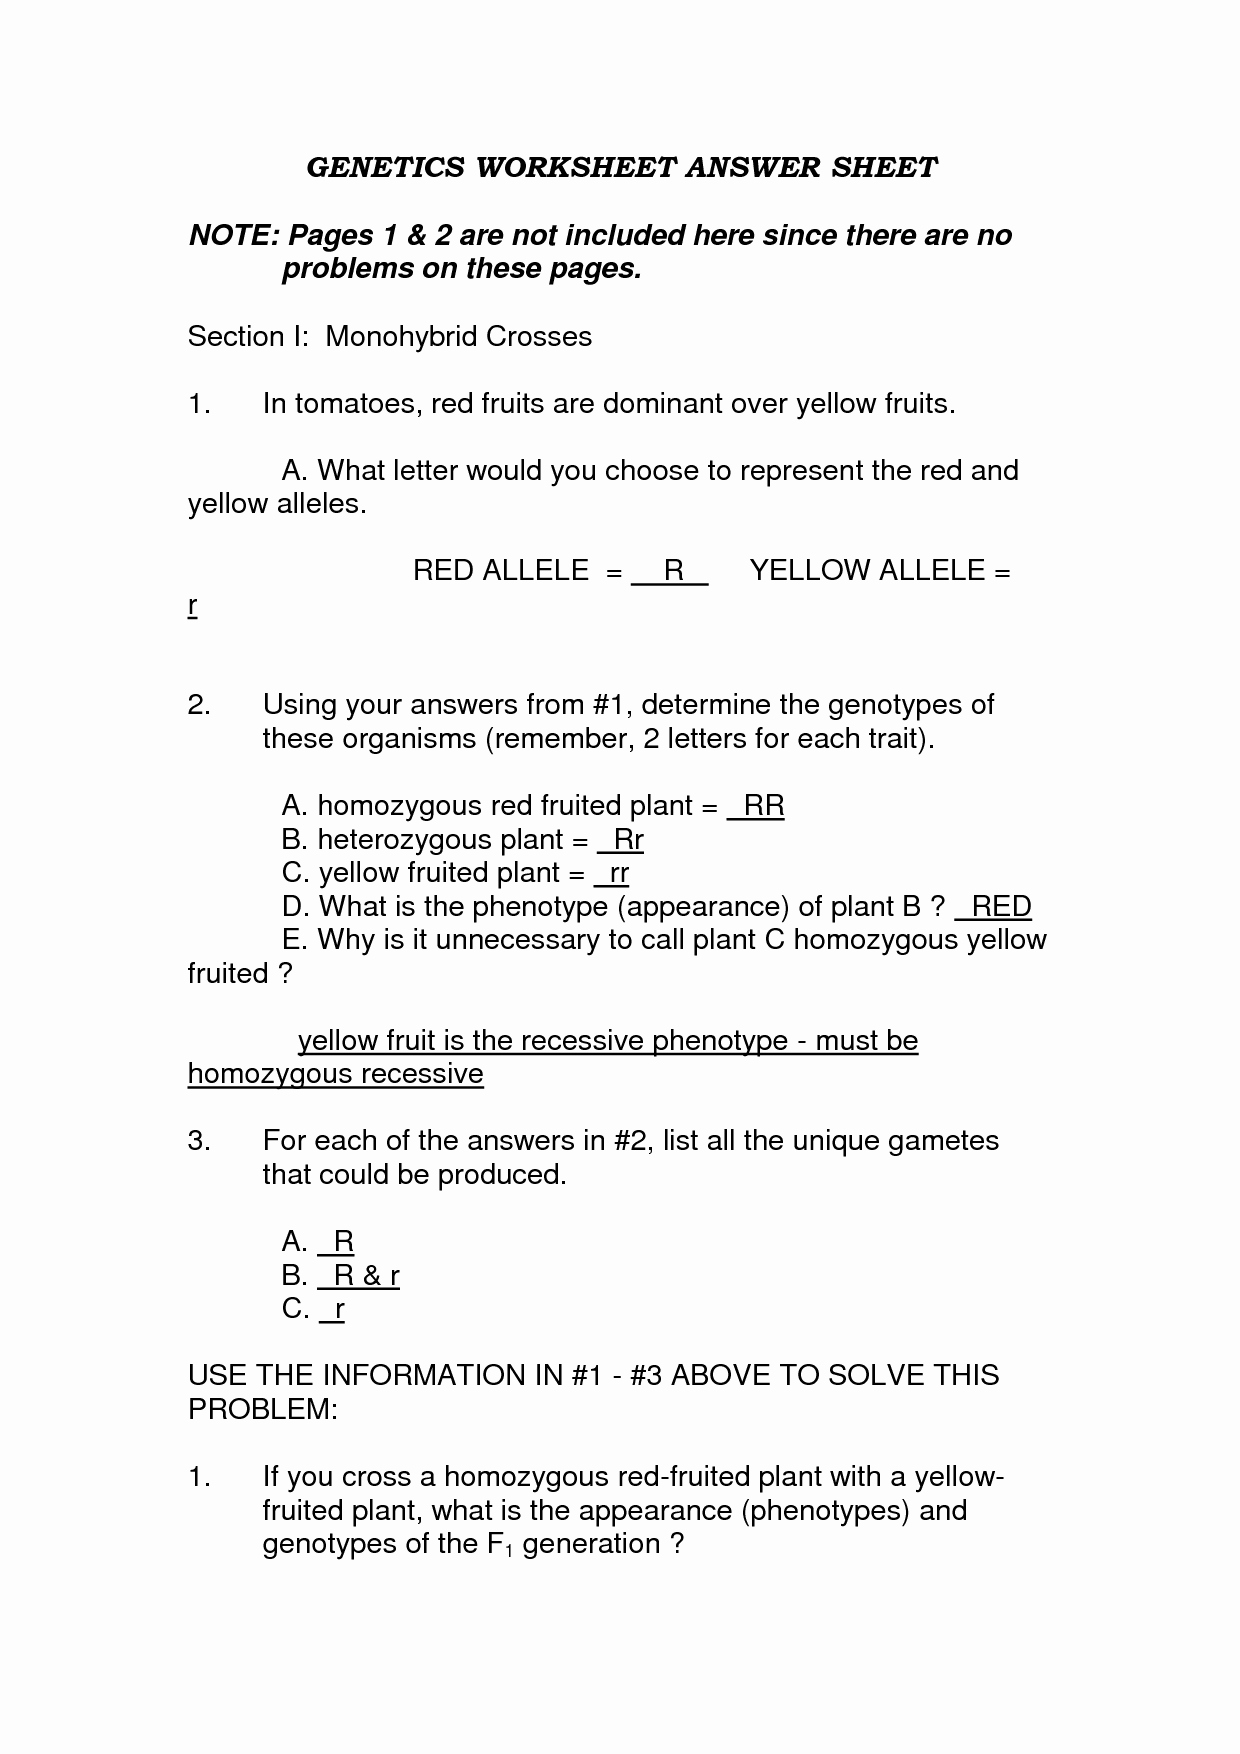 Monohybrid Crosses Worksheet Answers Awesome 19 Best Of the Genetic Code Worksheet Answers